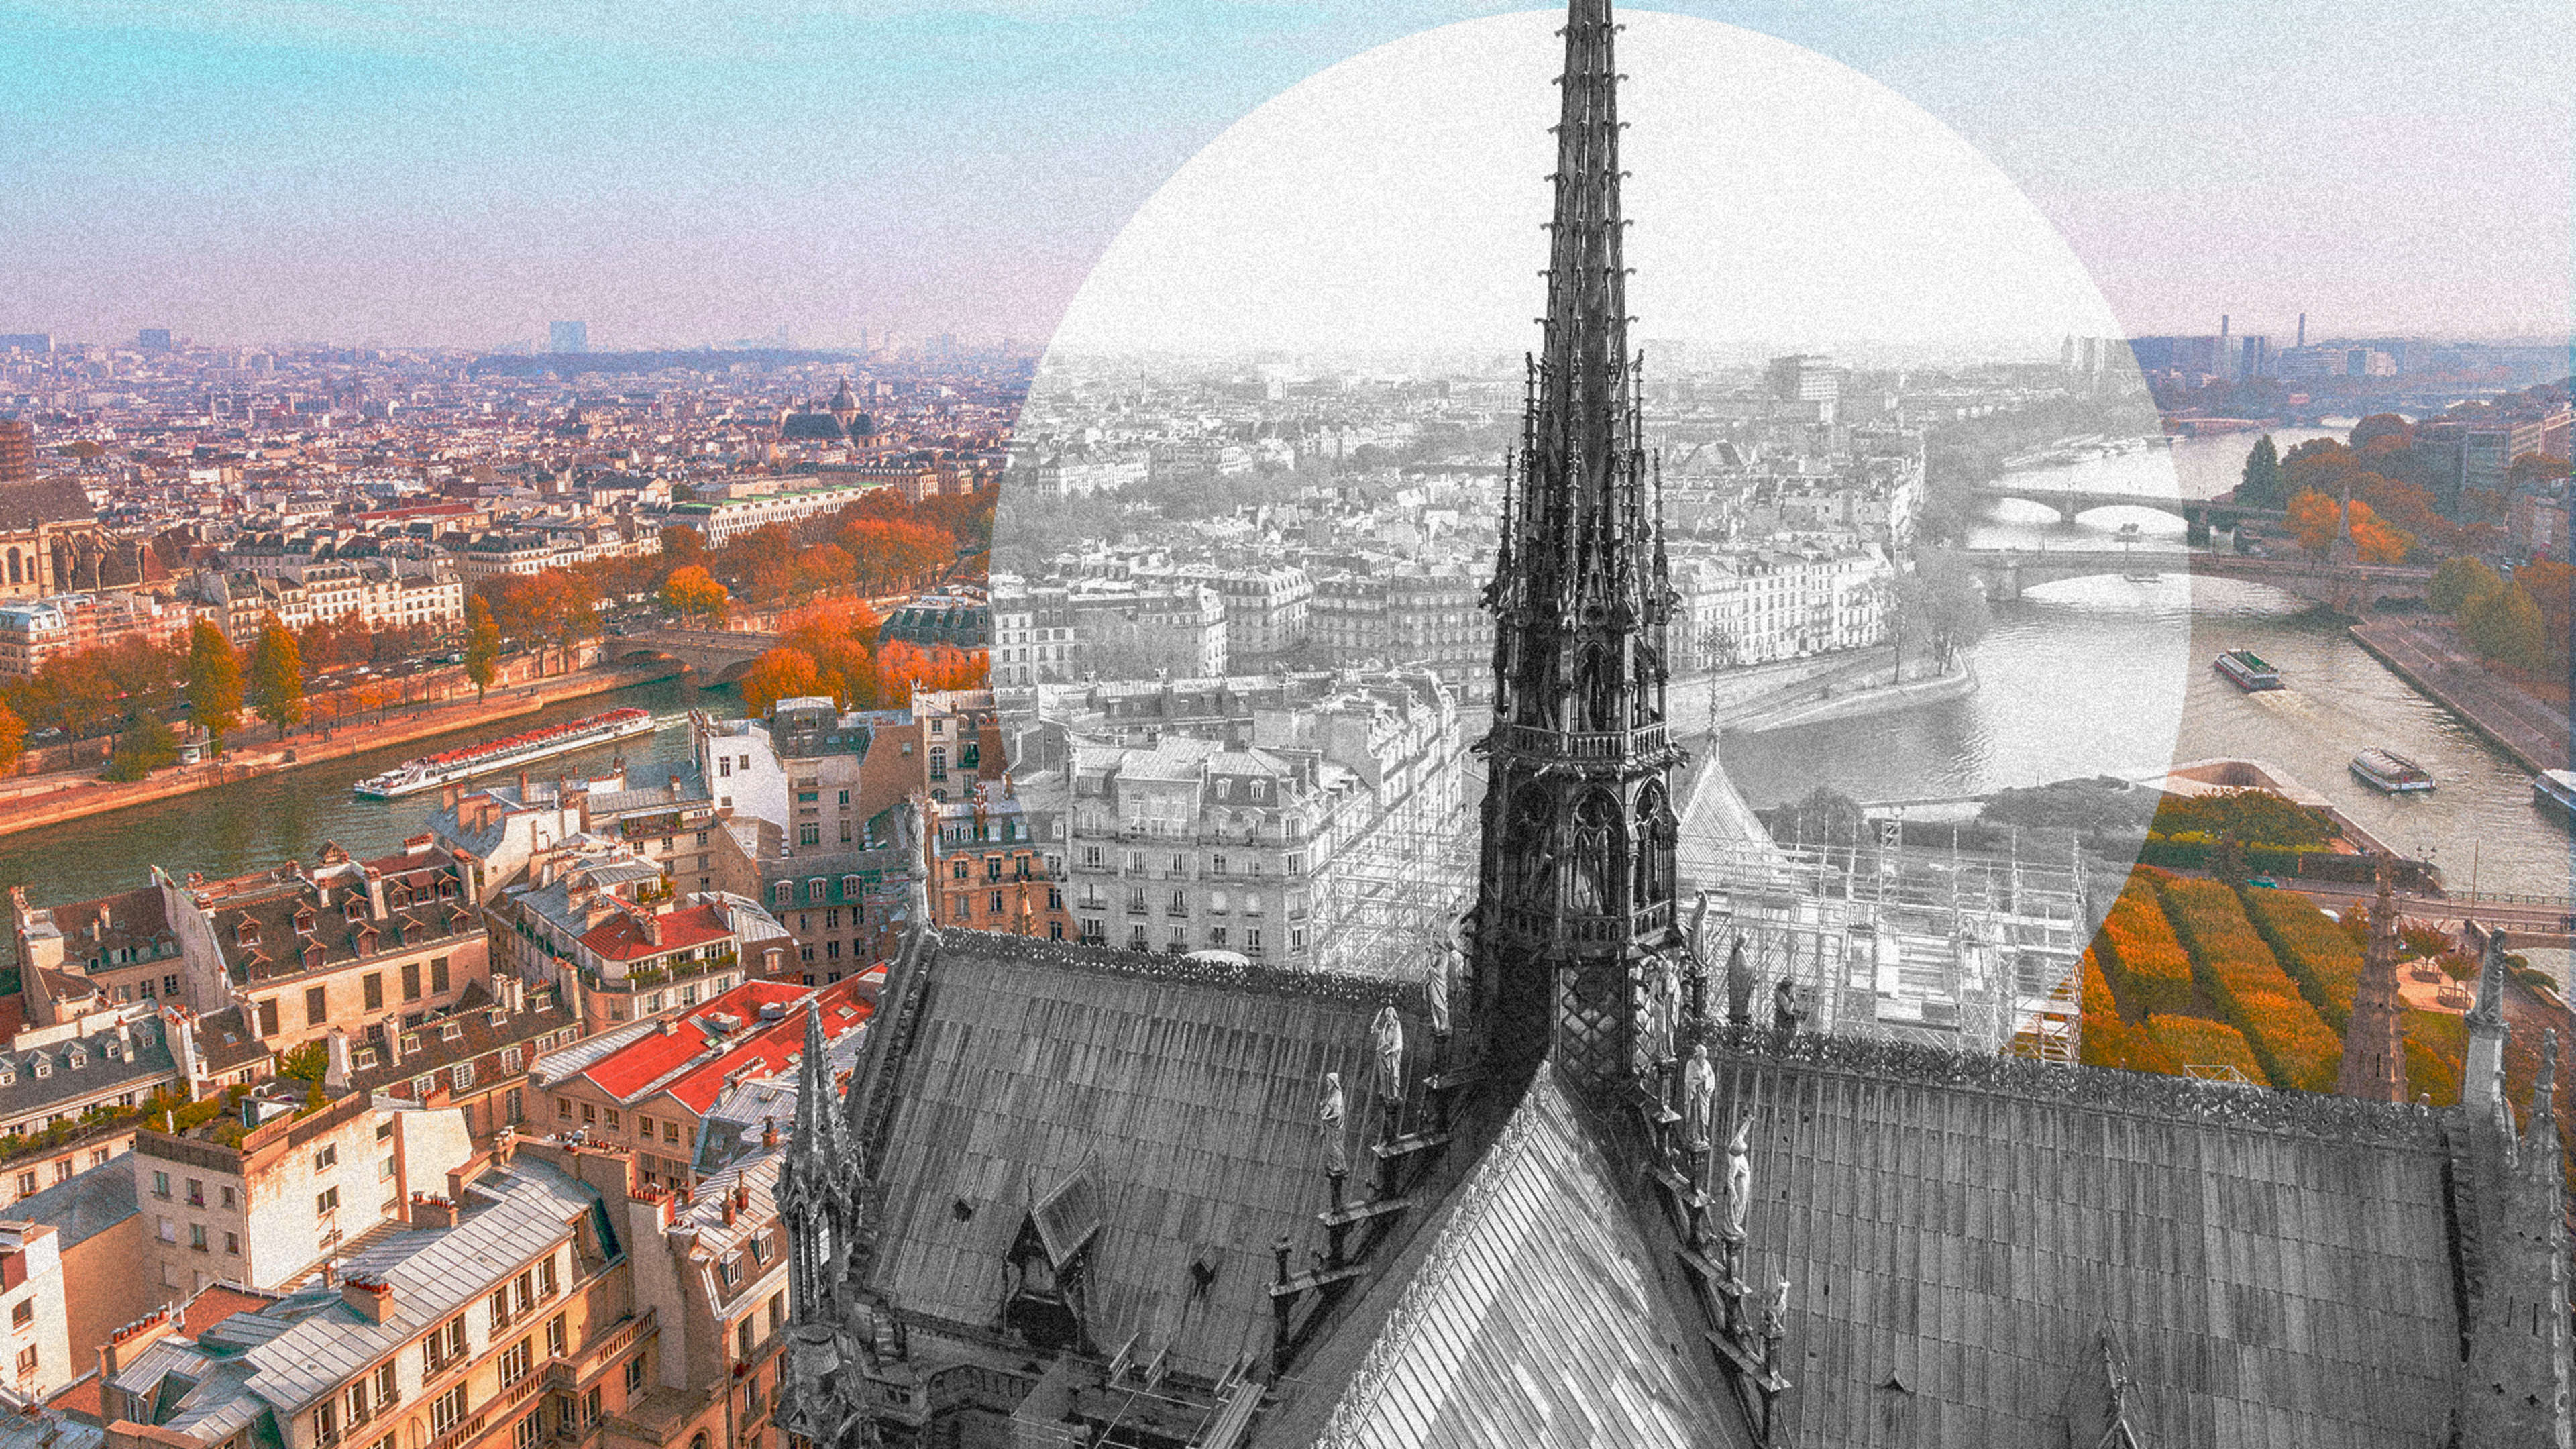 The competition to redesign Notre-Dame’s lost spire is already on